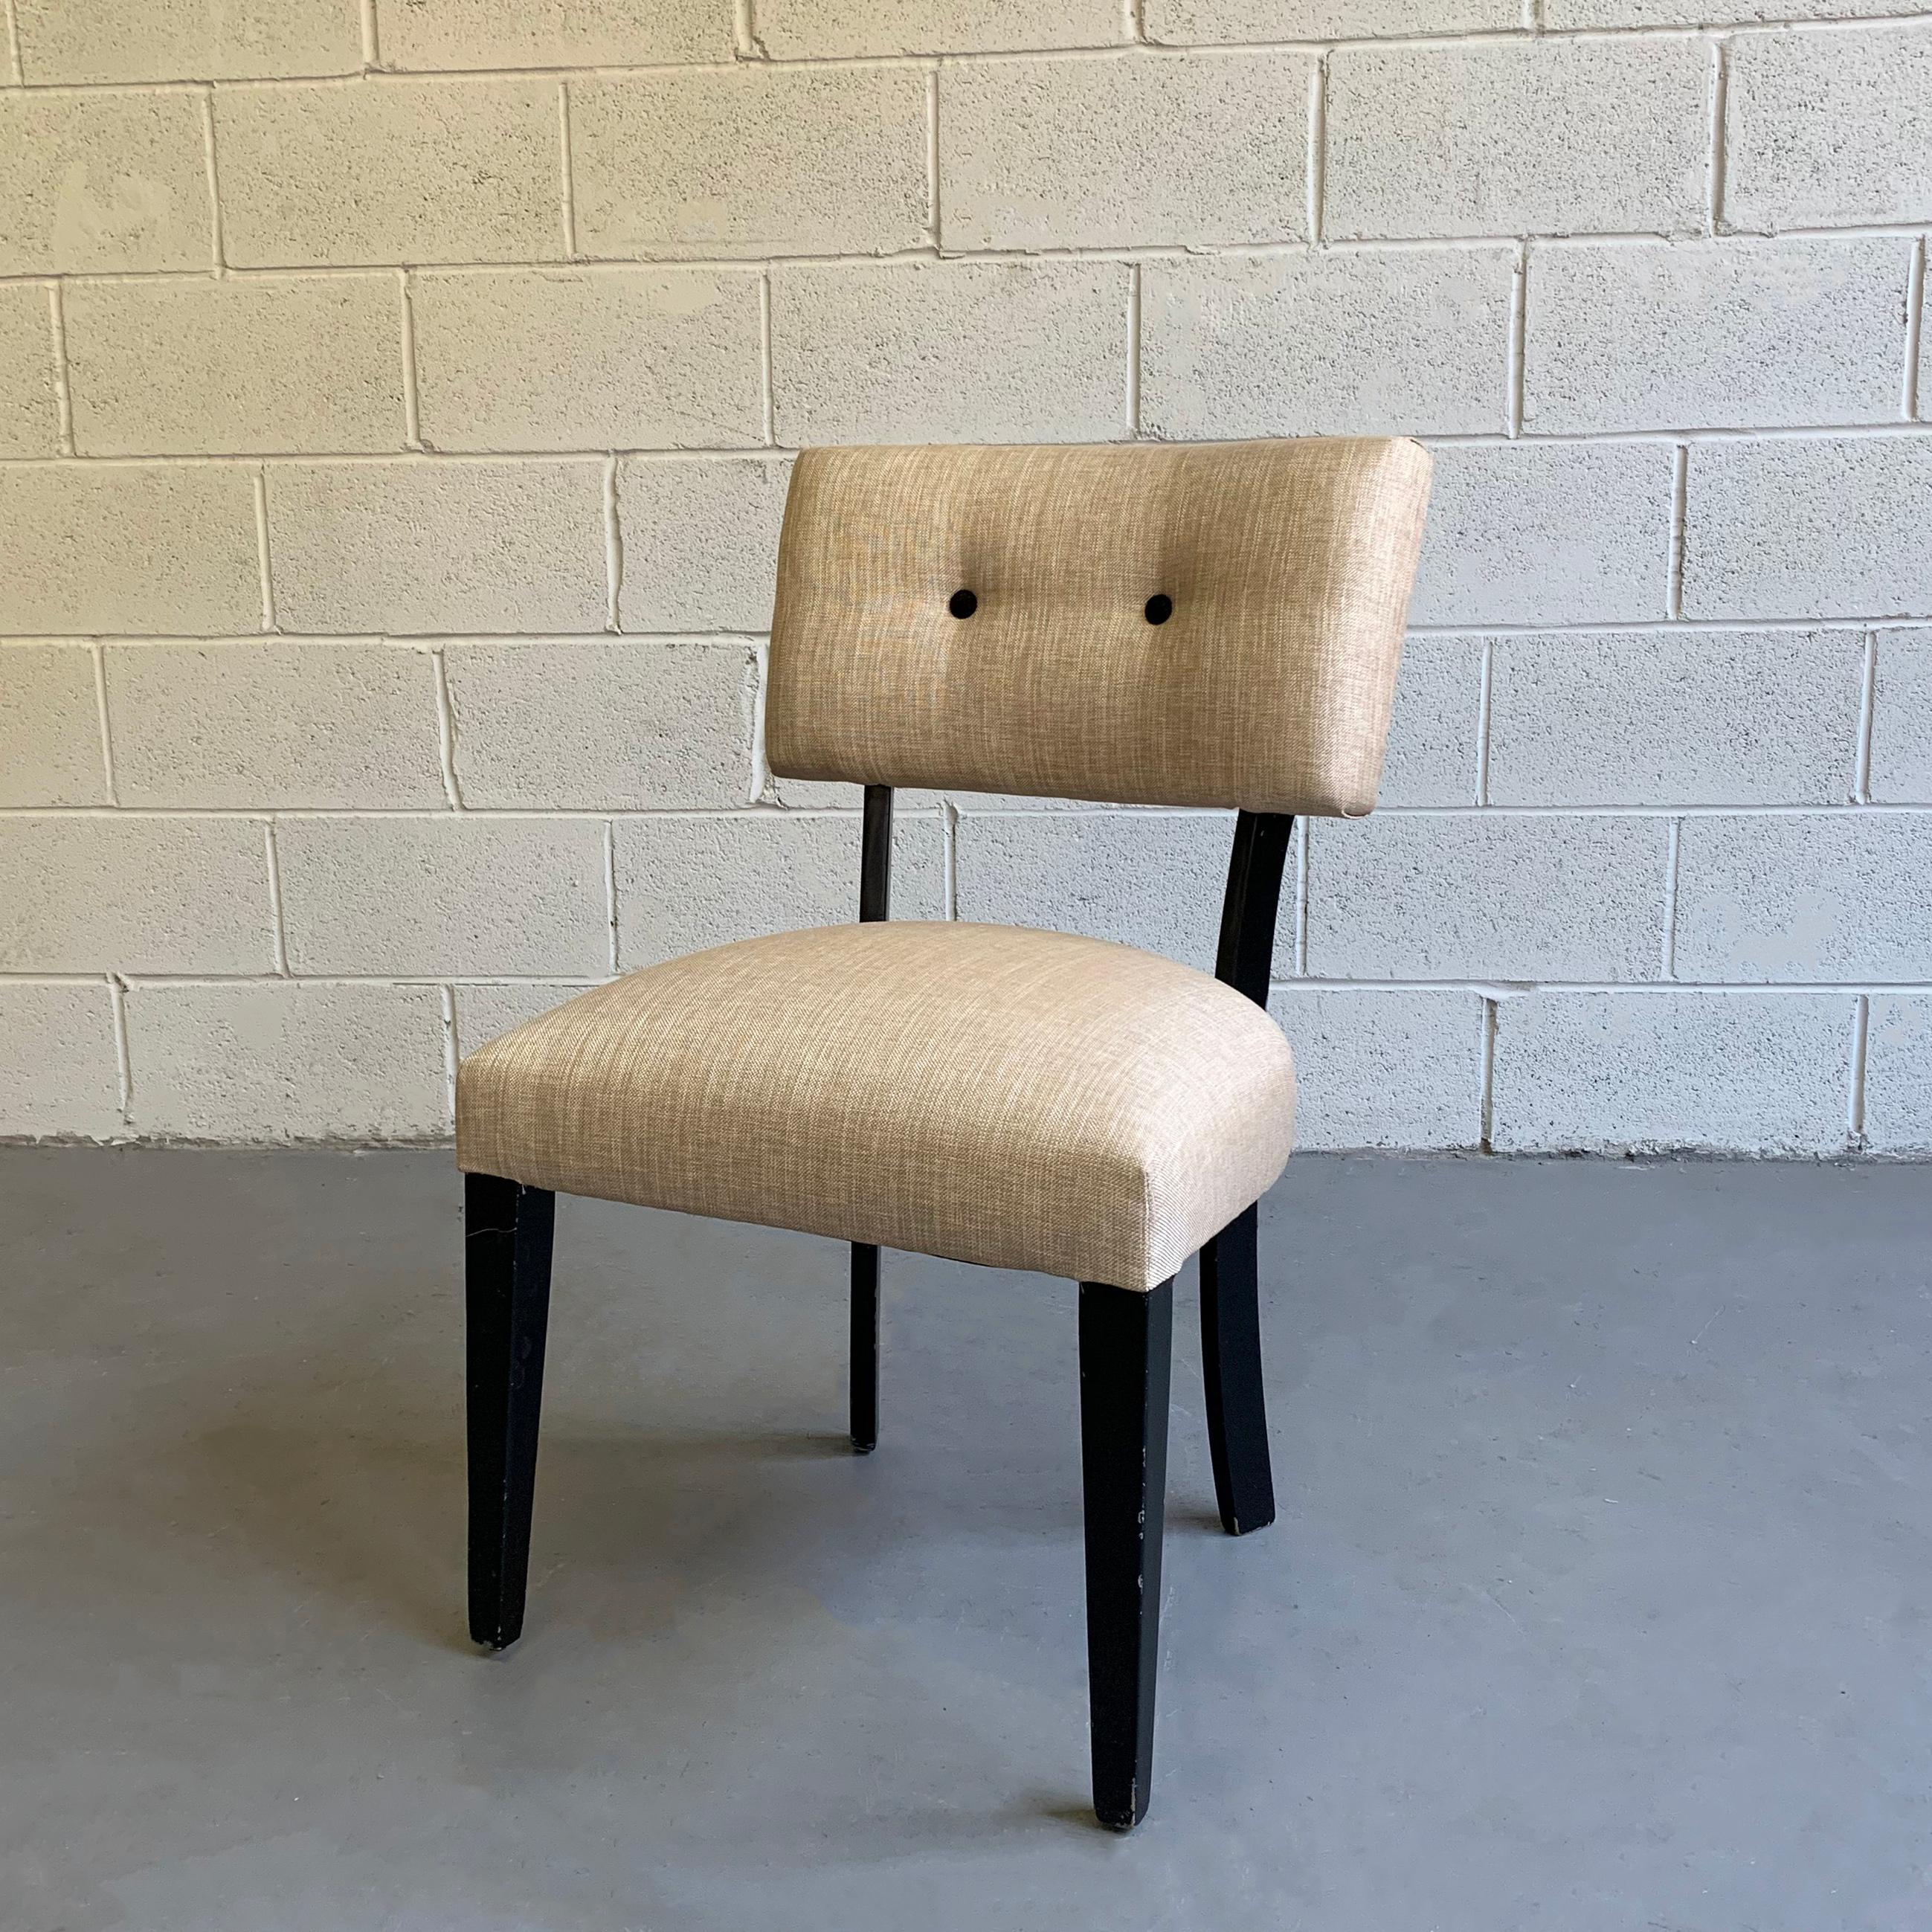 Mid-Century Modern, slipper side chair features a black lacquered maple frame with woven, cotton linen upholstery and contrasting covered buttons.